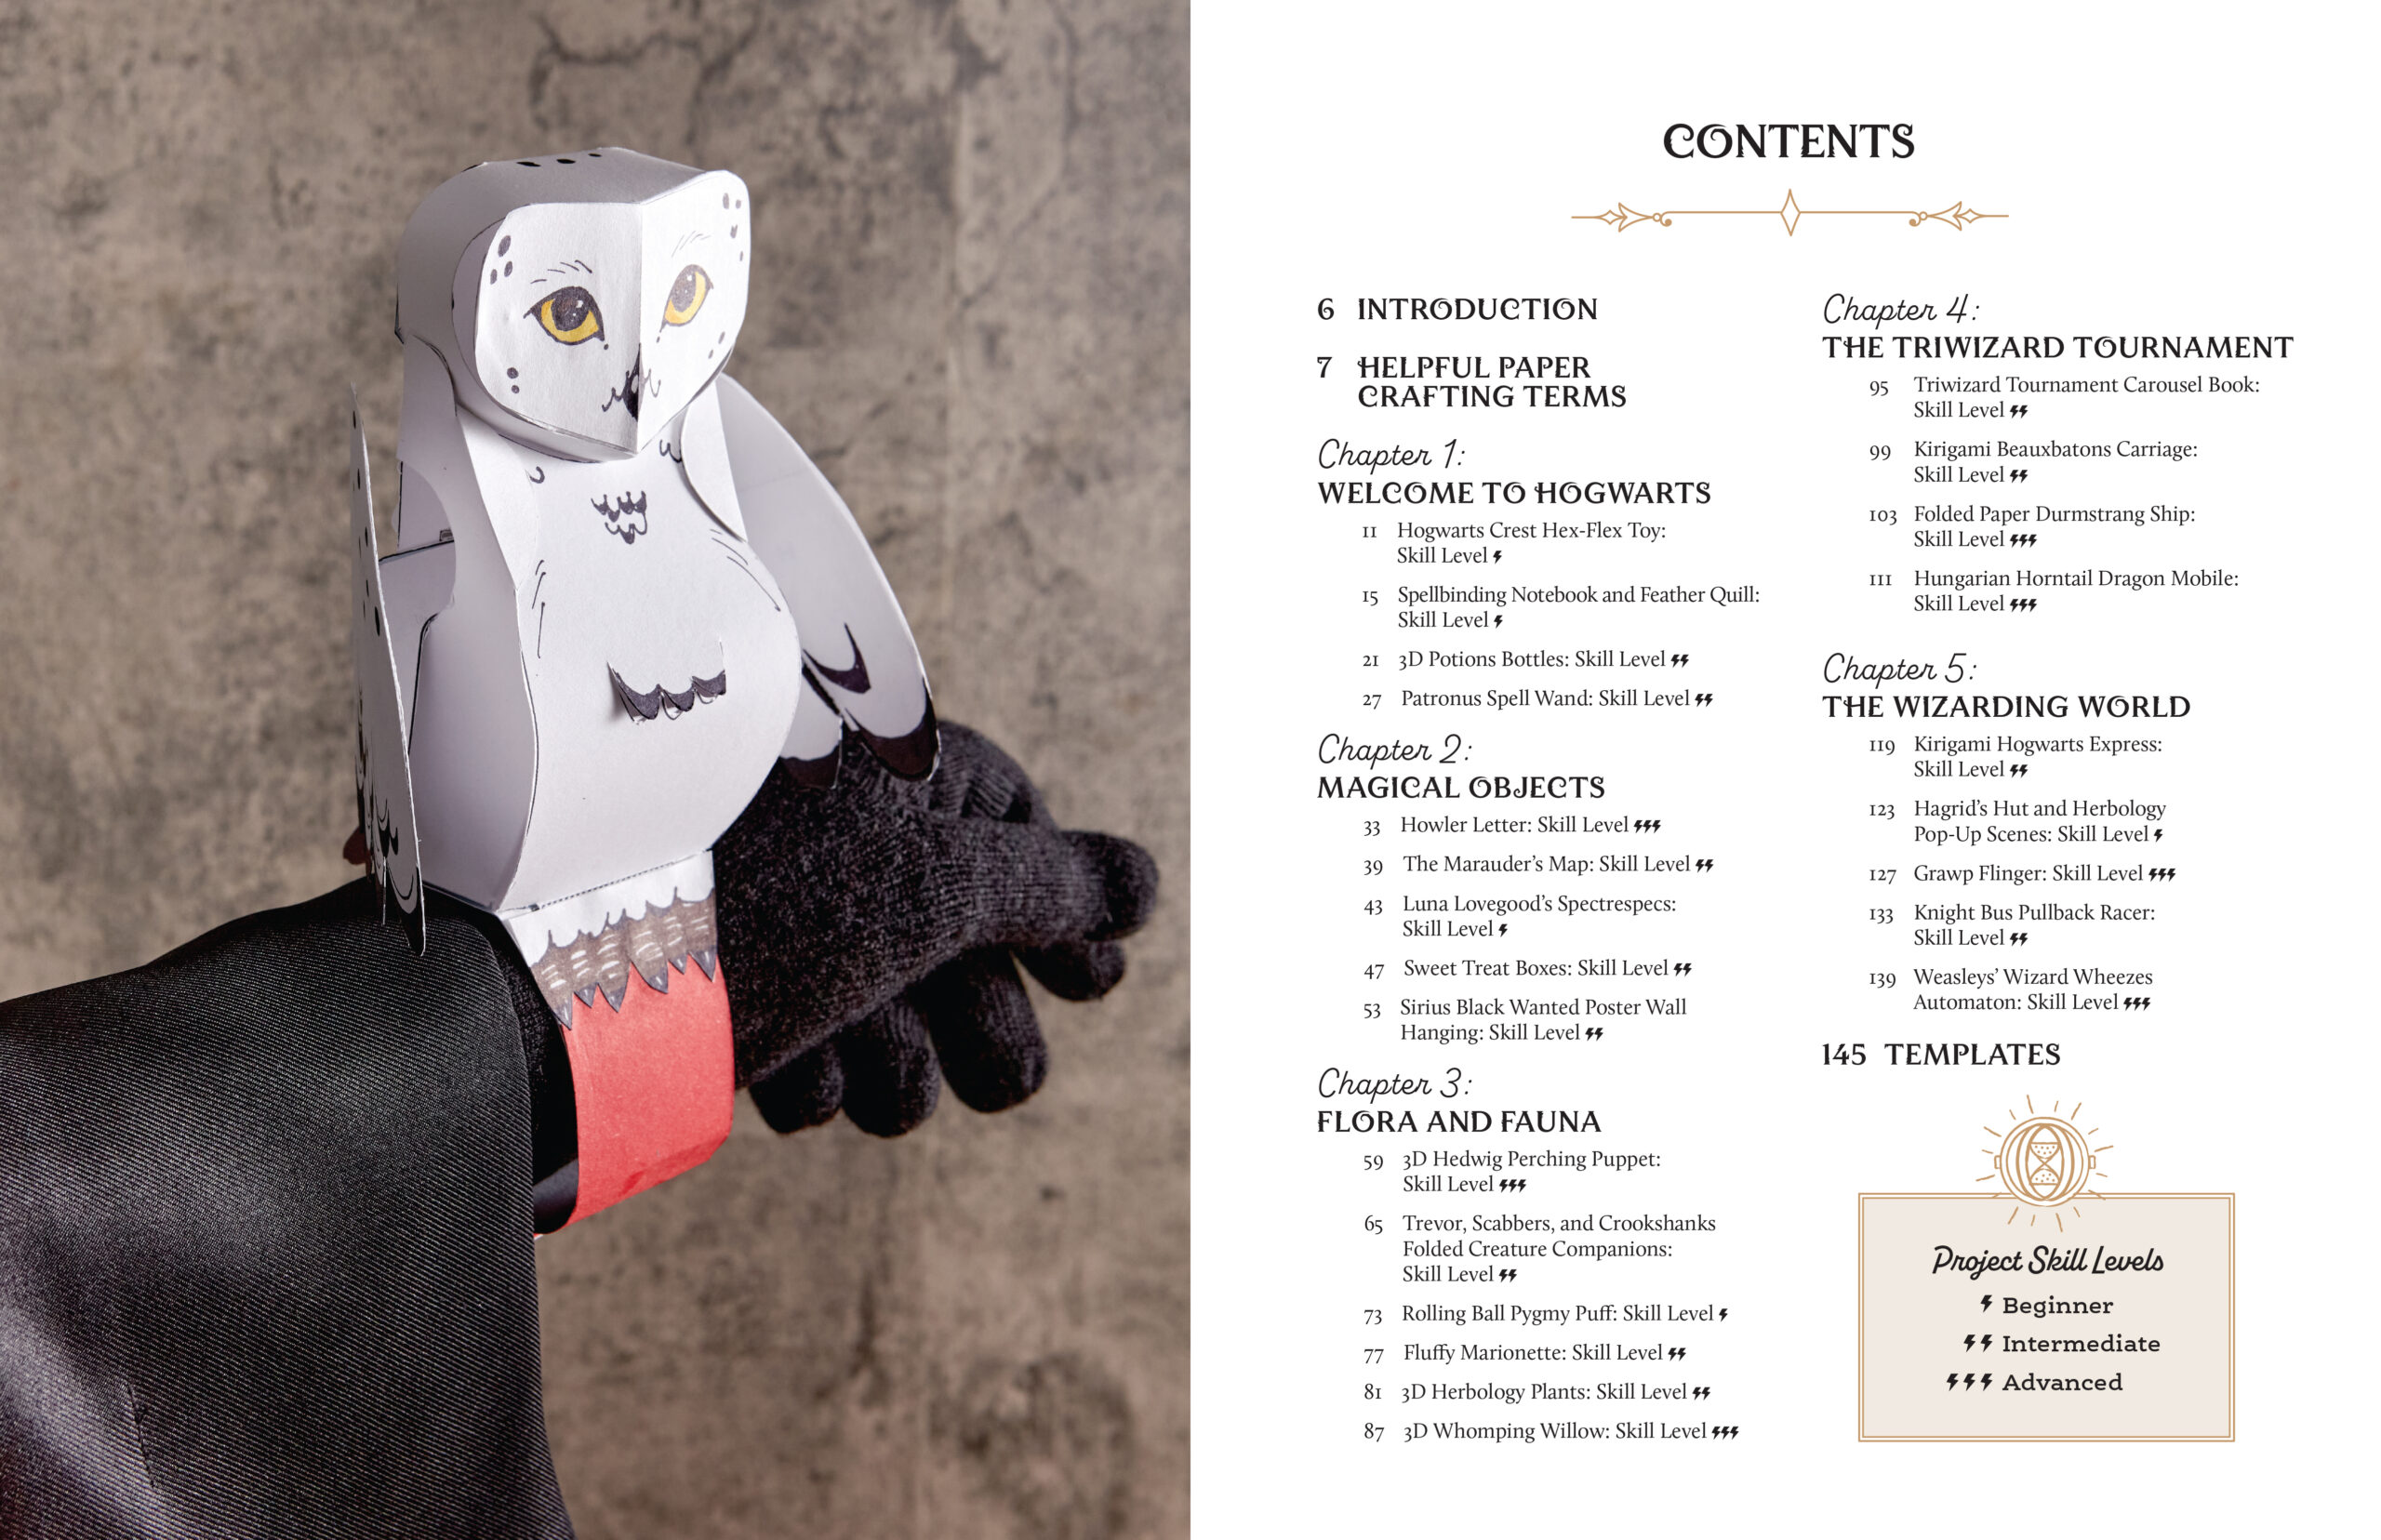 The table of contents of “Harry Potter: Magical Paper Crafts” lists the crafts featured in the book.